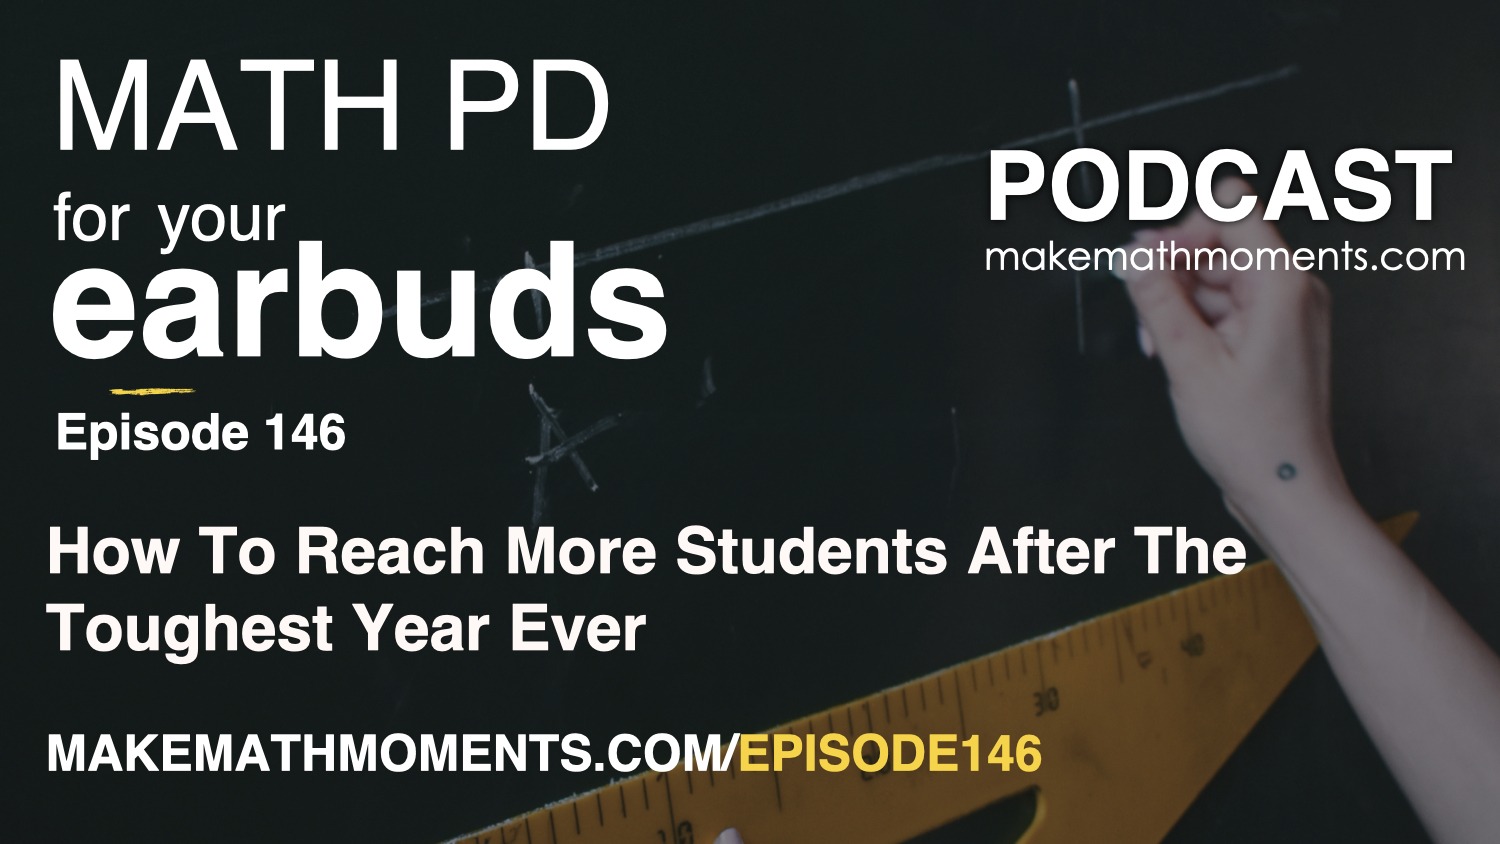 Episode 146: How To Reach More Students After The Toughest Year Ever